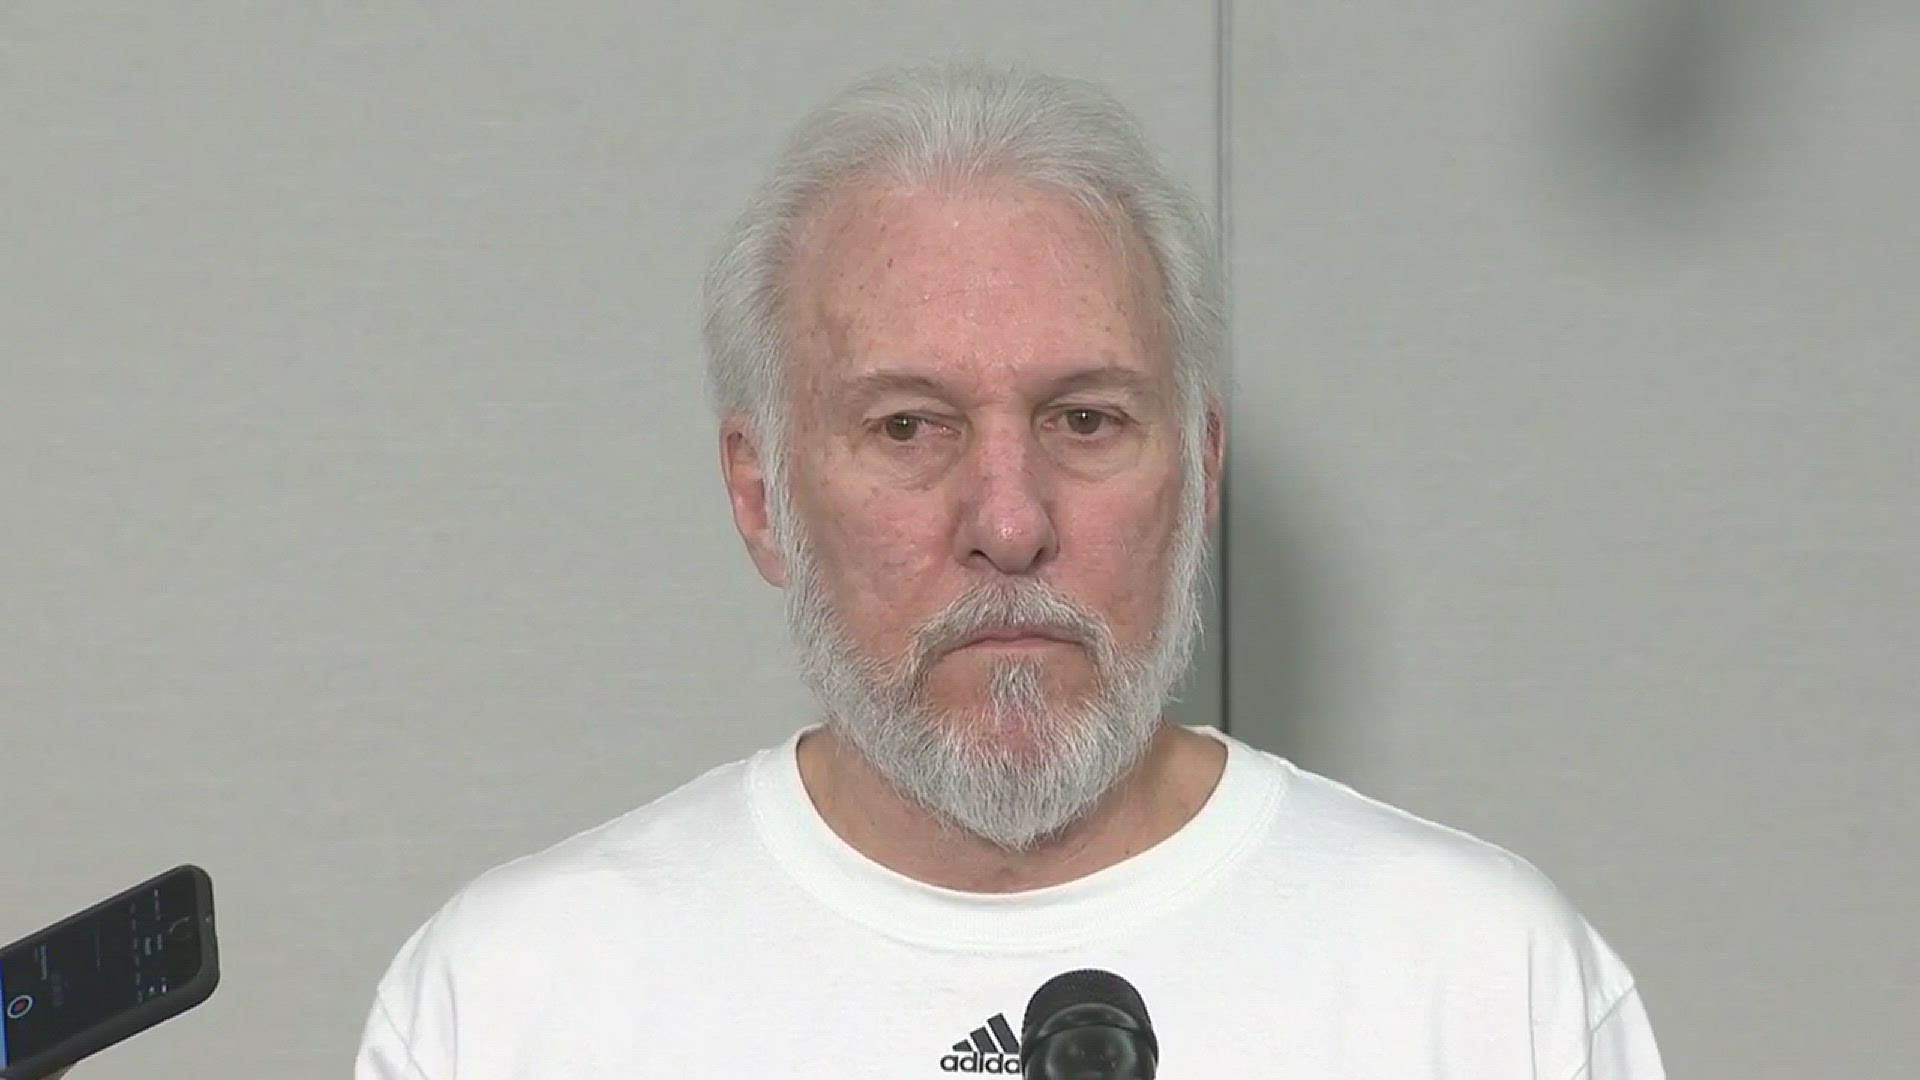 Raw video: During a press conference, Spurs Head Coach Gregg Popovich 'pops off' on Zaza after Kawhi's injury during Game 1 vs. Golden State.